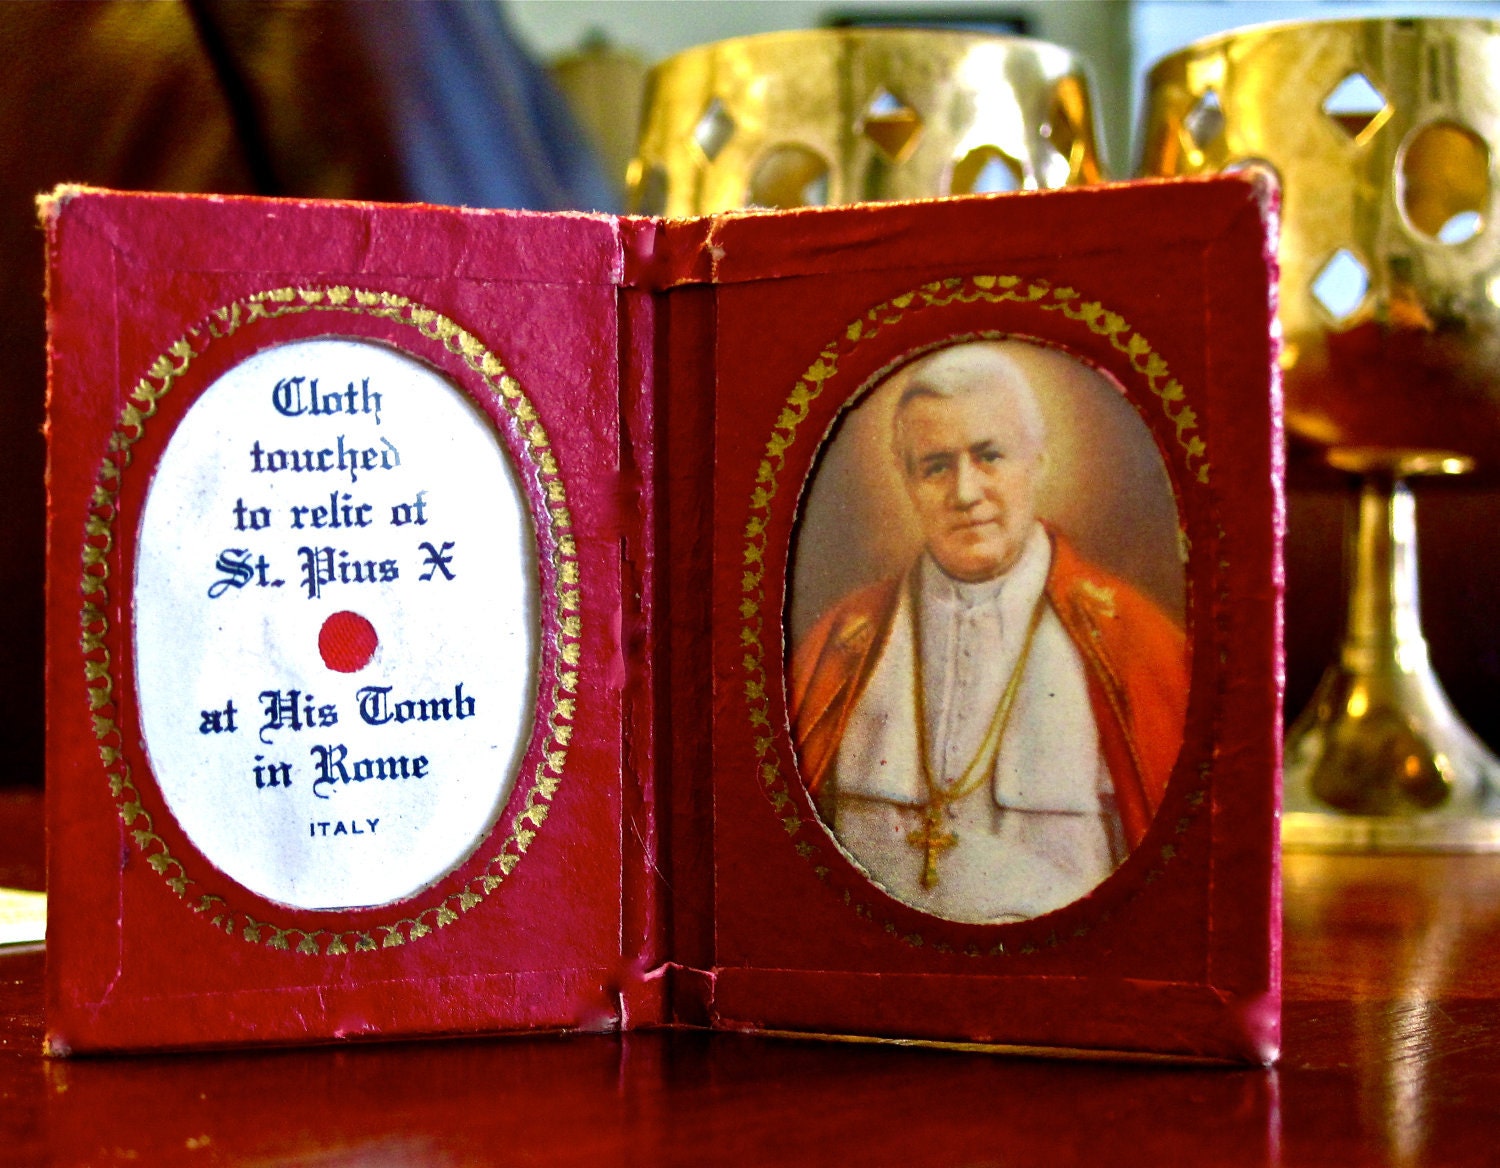 Antique Mid-Century Catholic Relic Book - Bound & Framed Cloth Touched to Relic of St Pius with Picture Made in Italy